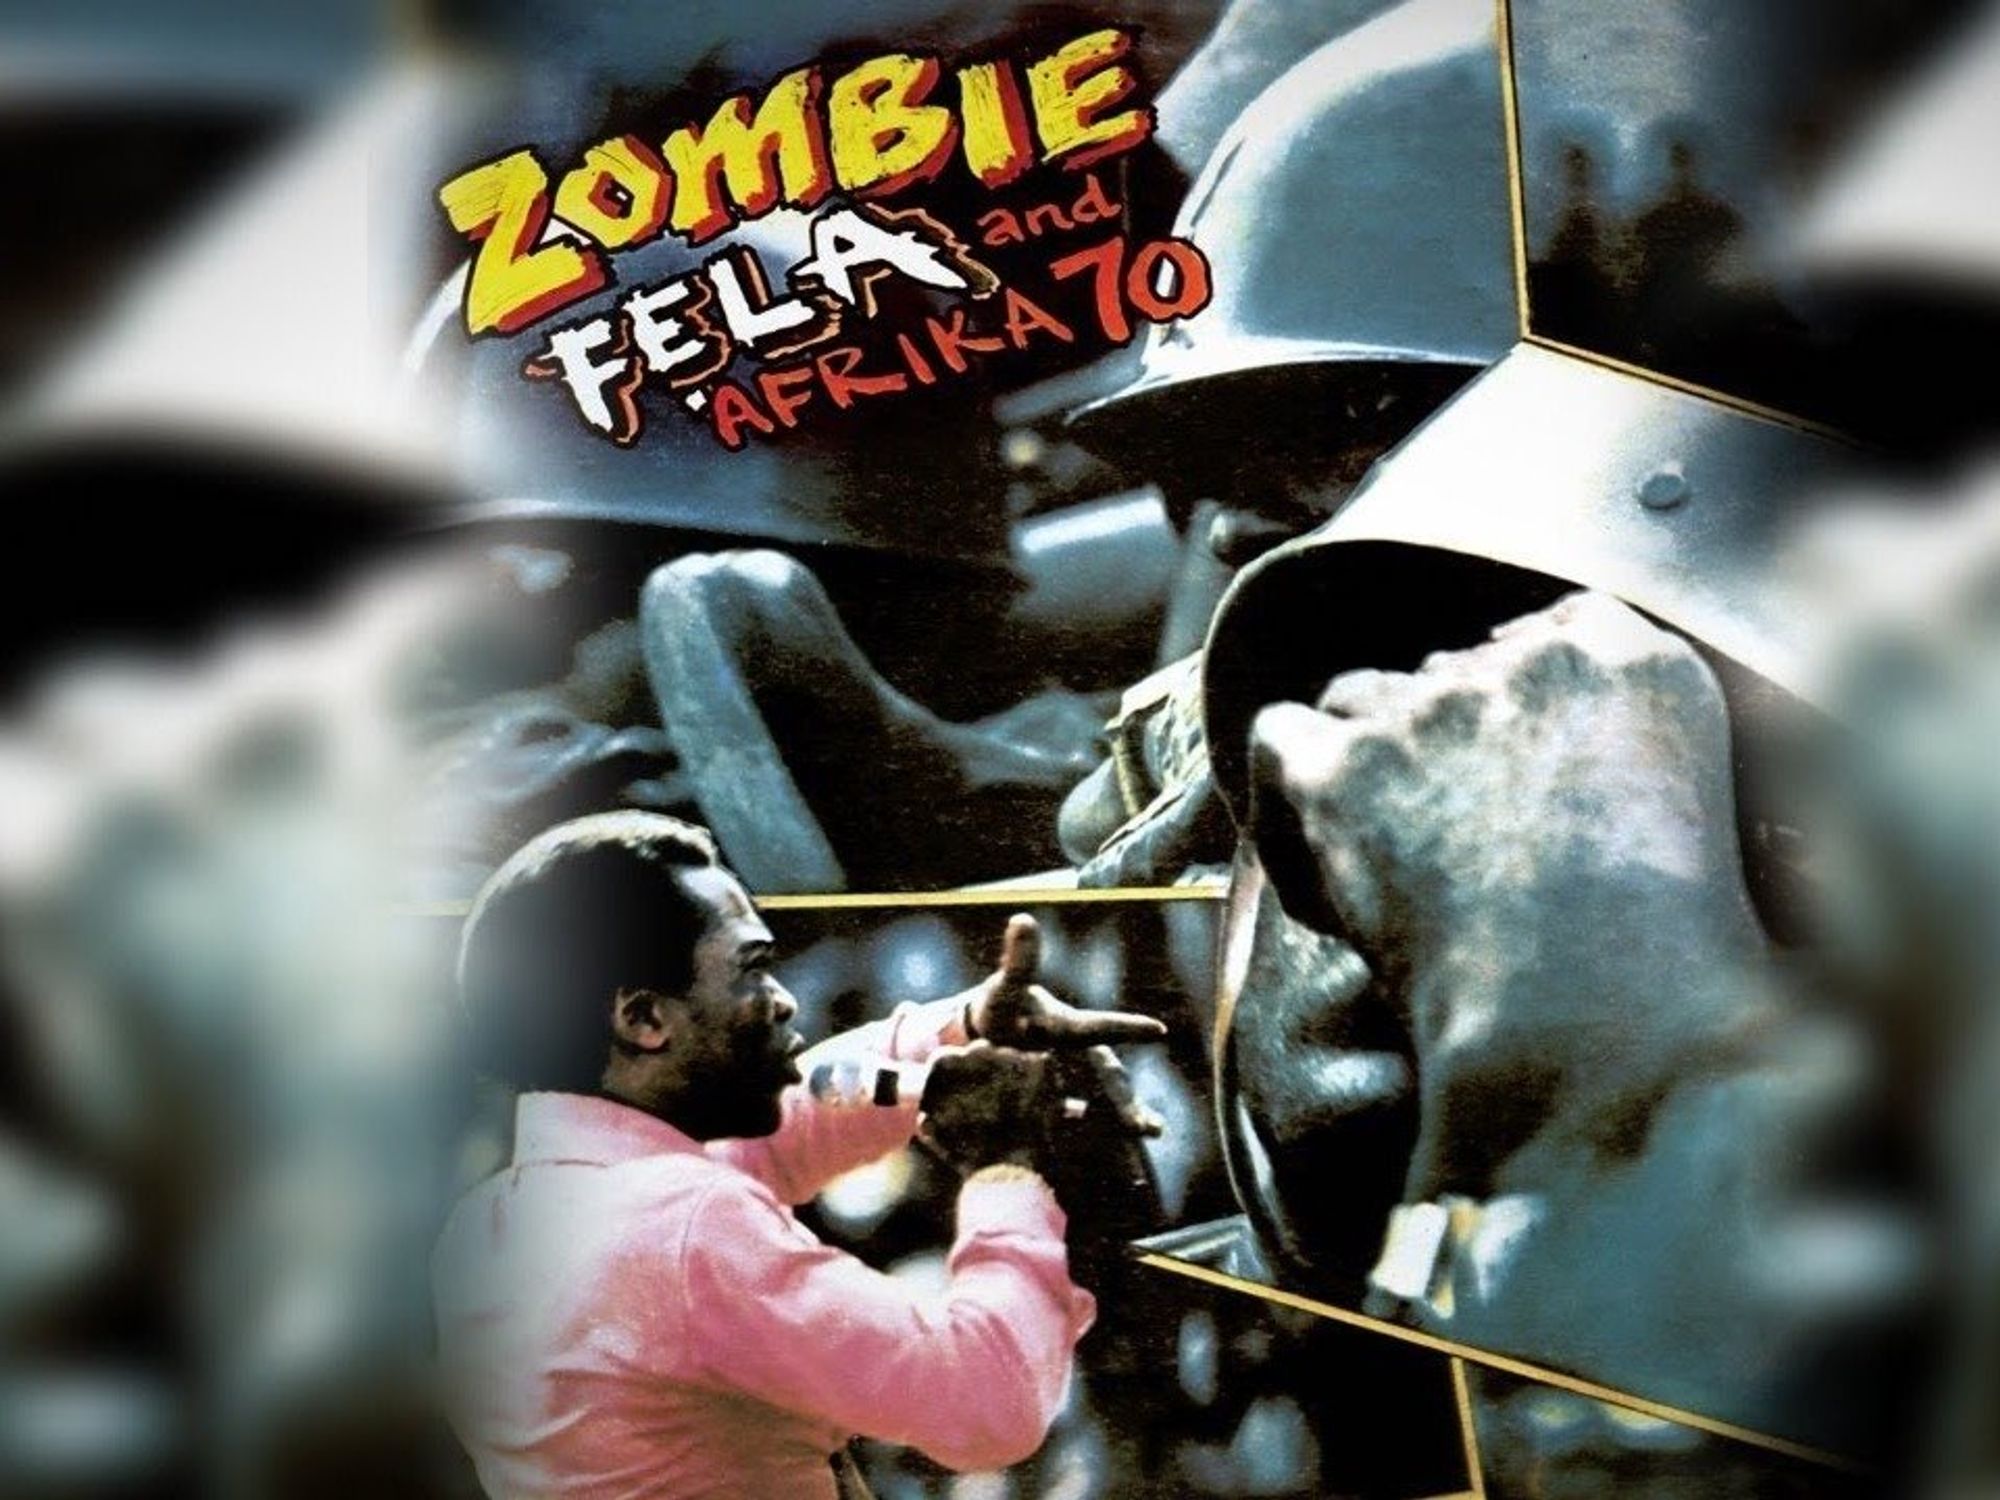 fela kuti stands in front of soldiers in the Zombie album cover art 